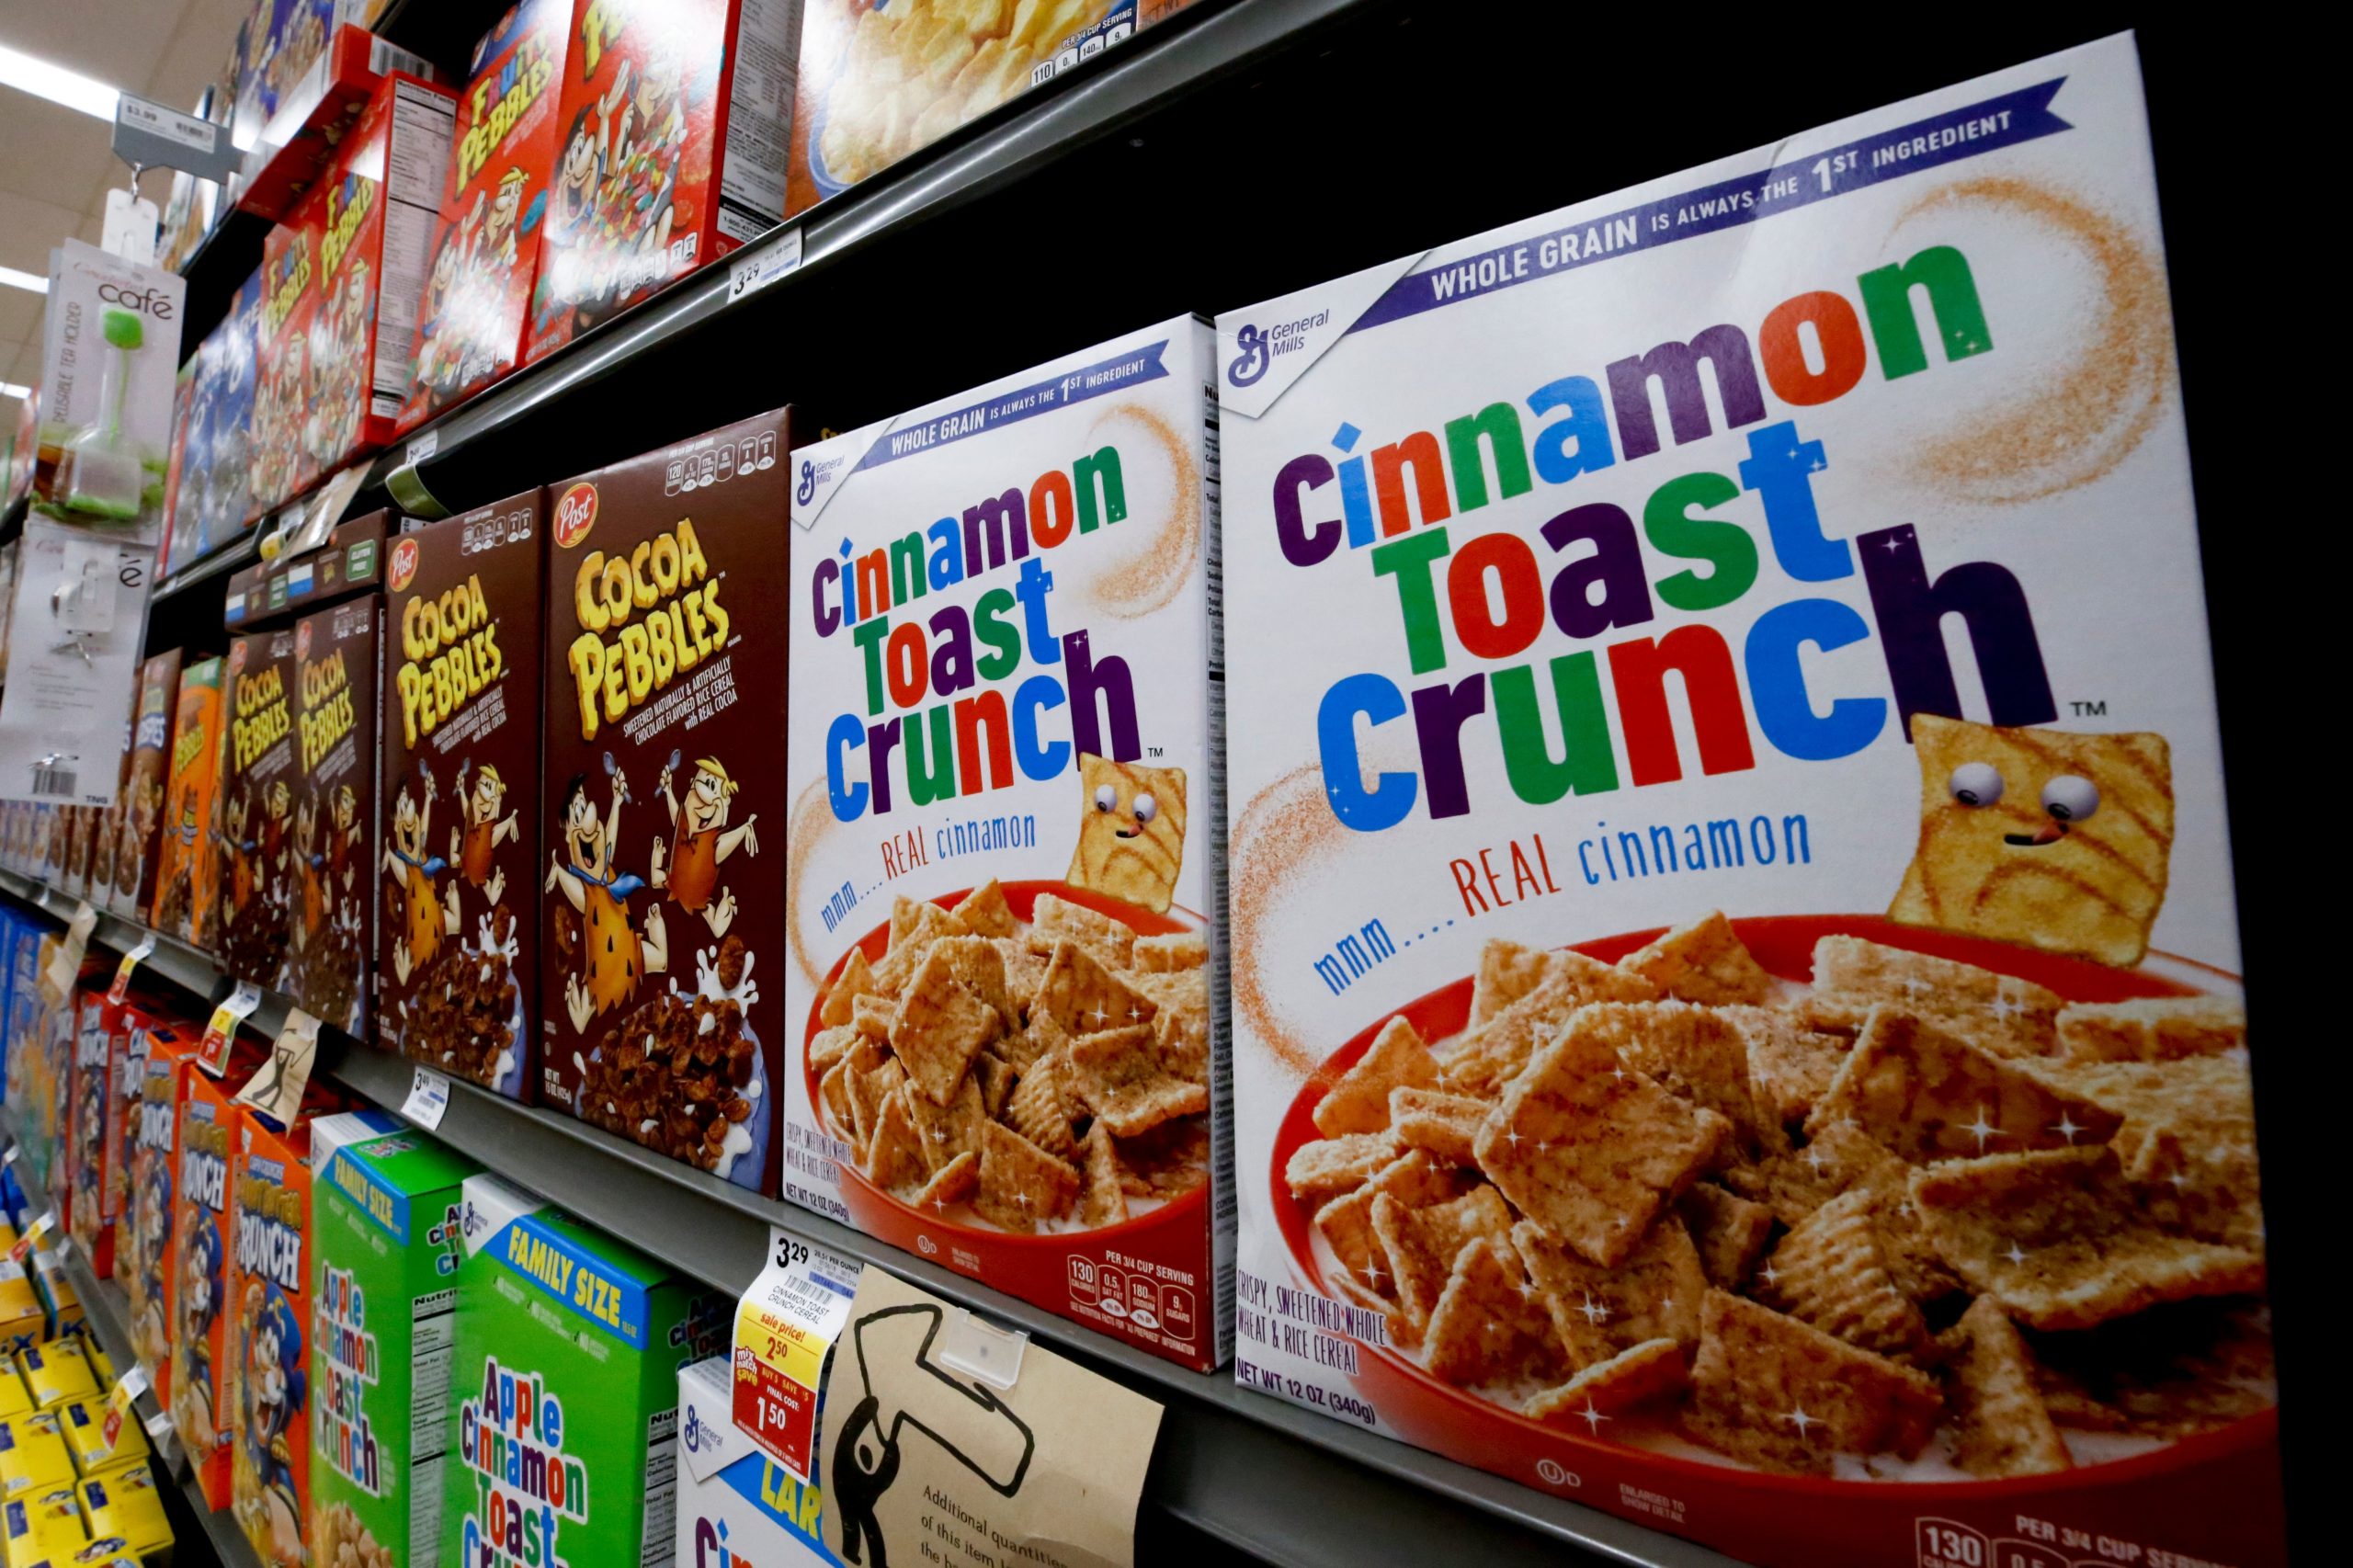 Boxes of General Mills Cinnamon Toast Crunch cereal sit on display in a market in Pittsburgh on Aug. 8, 2018. (Photo: Gene J. Puskar, AP)